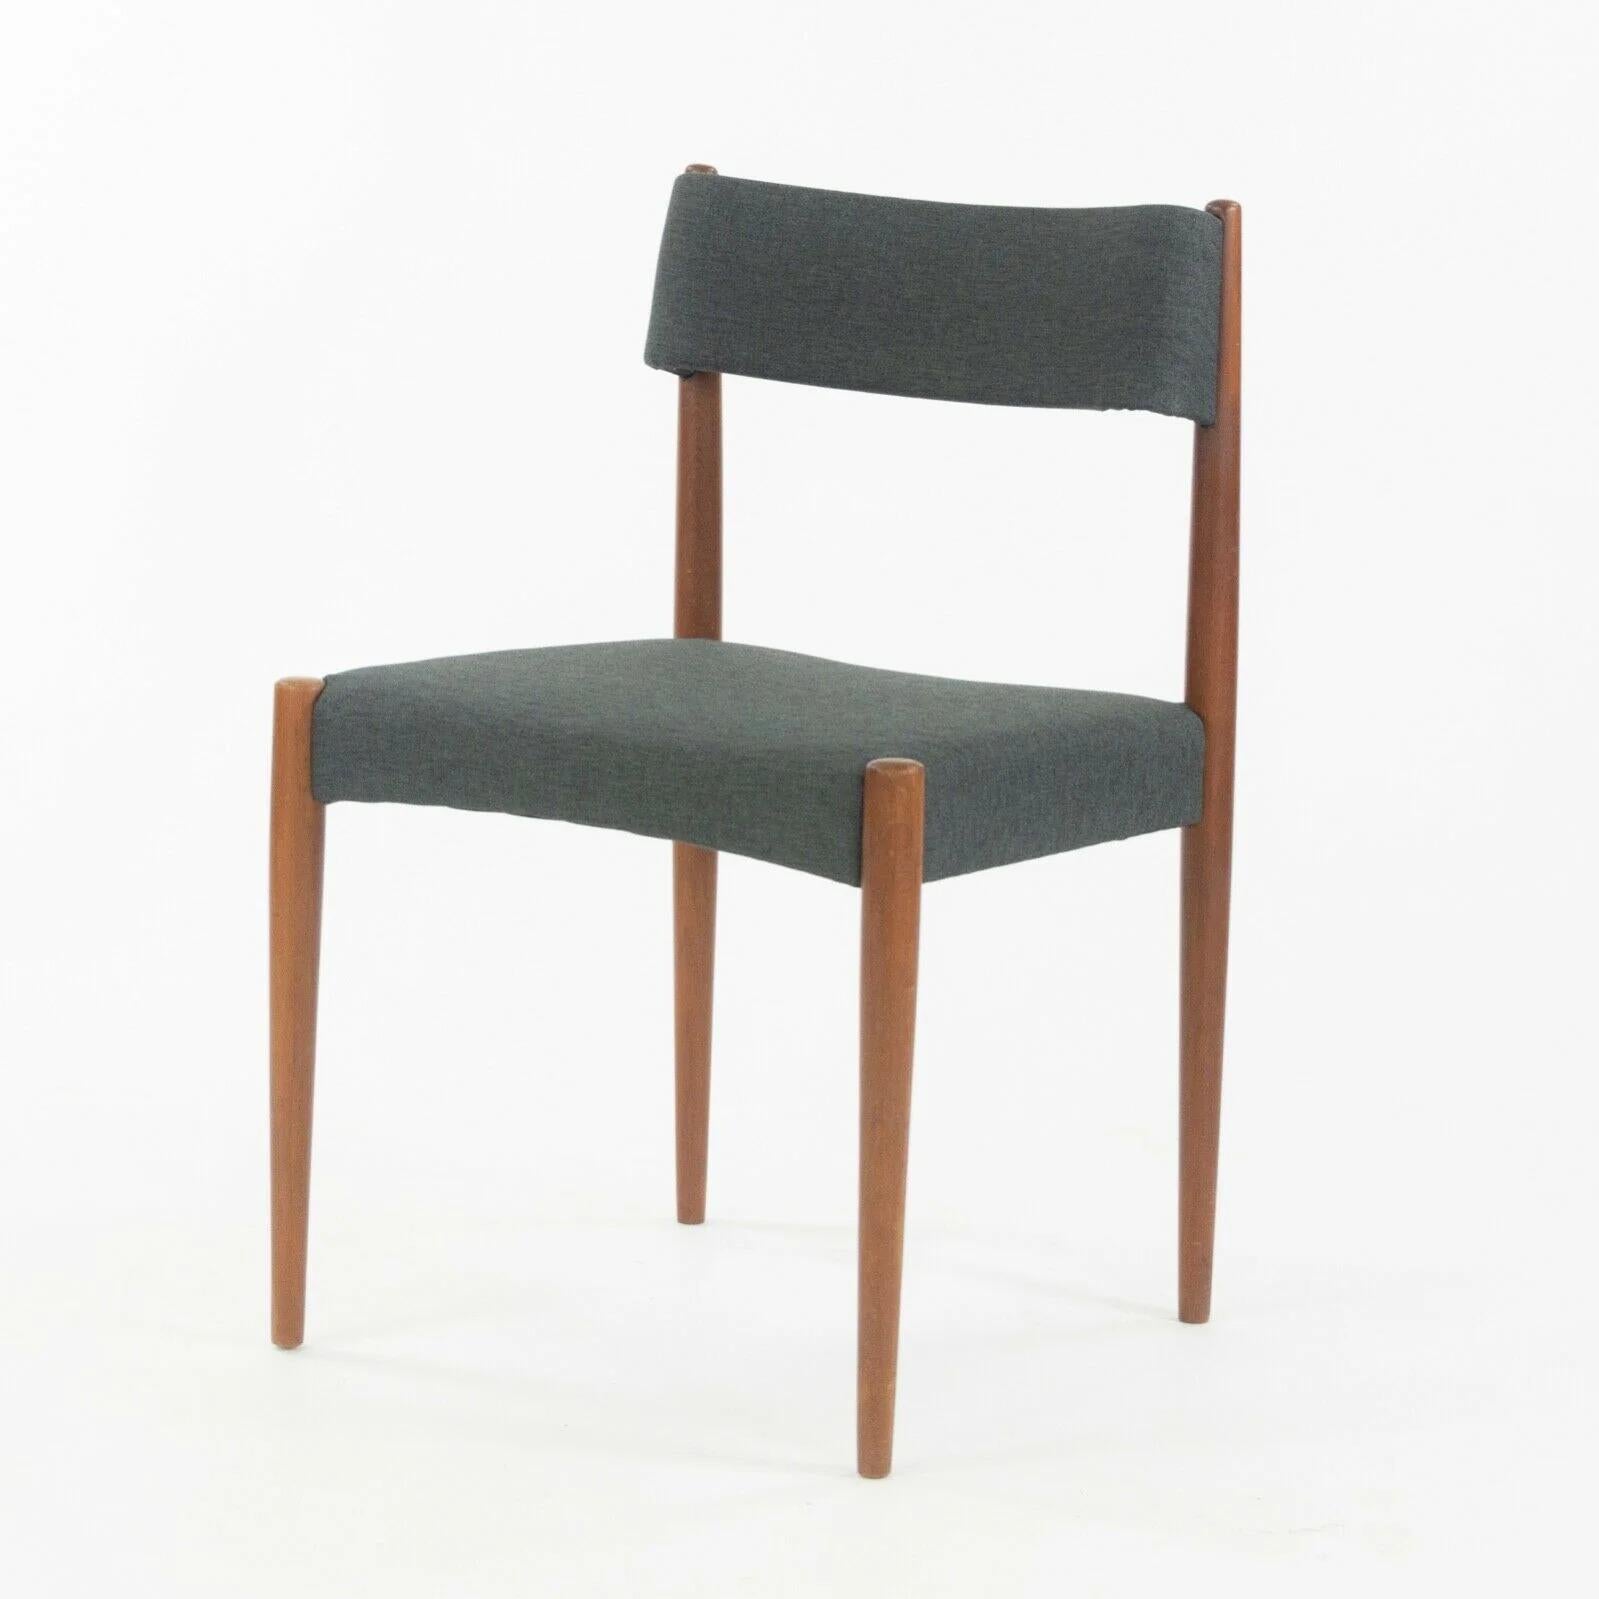 1960s Knud Faerch Bovenkamp Dining Chairs Netherlands New Upholstery Set of 5 For Sale 2